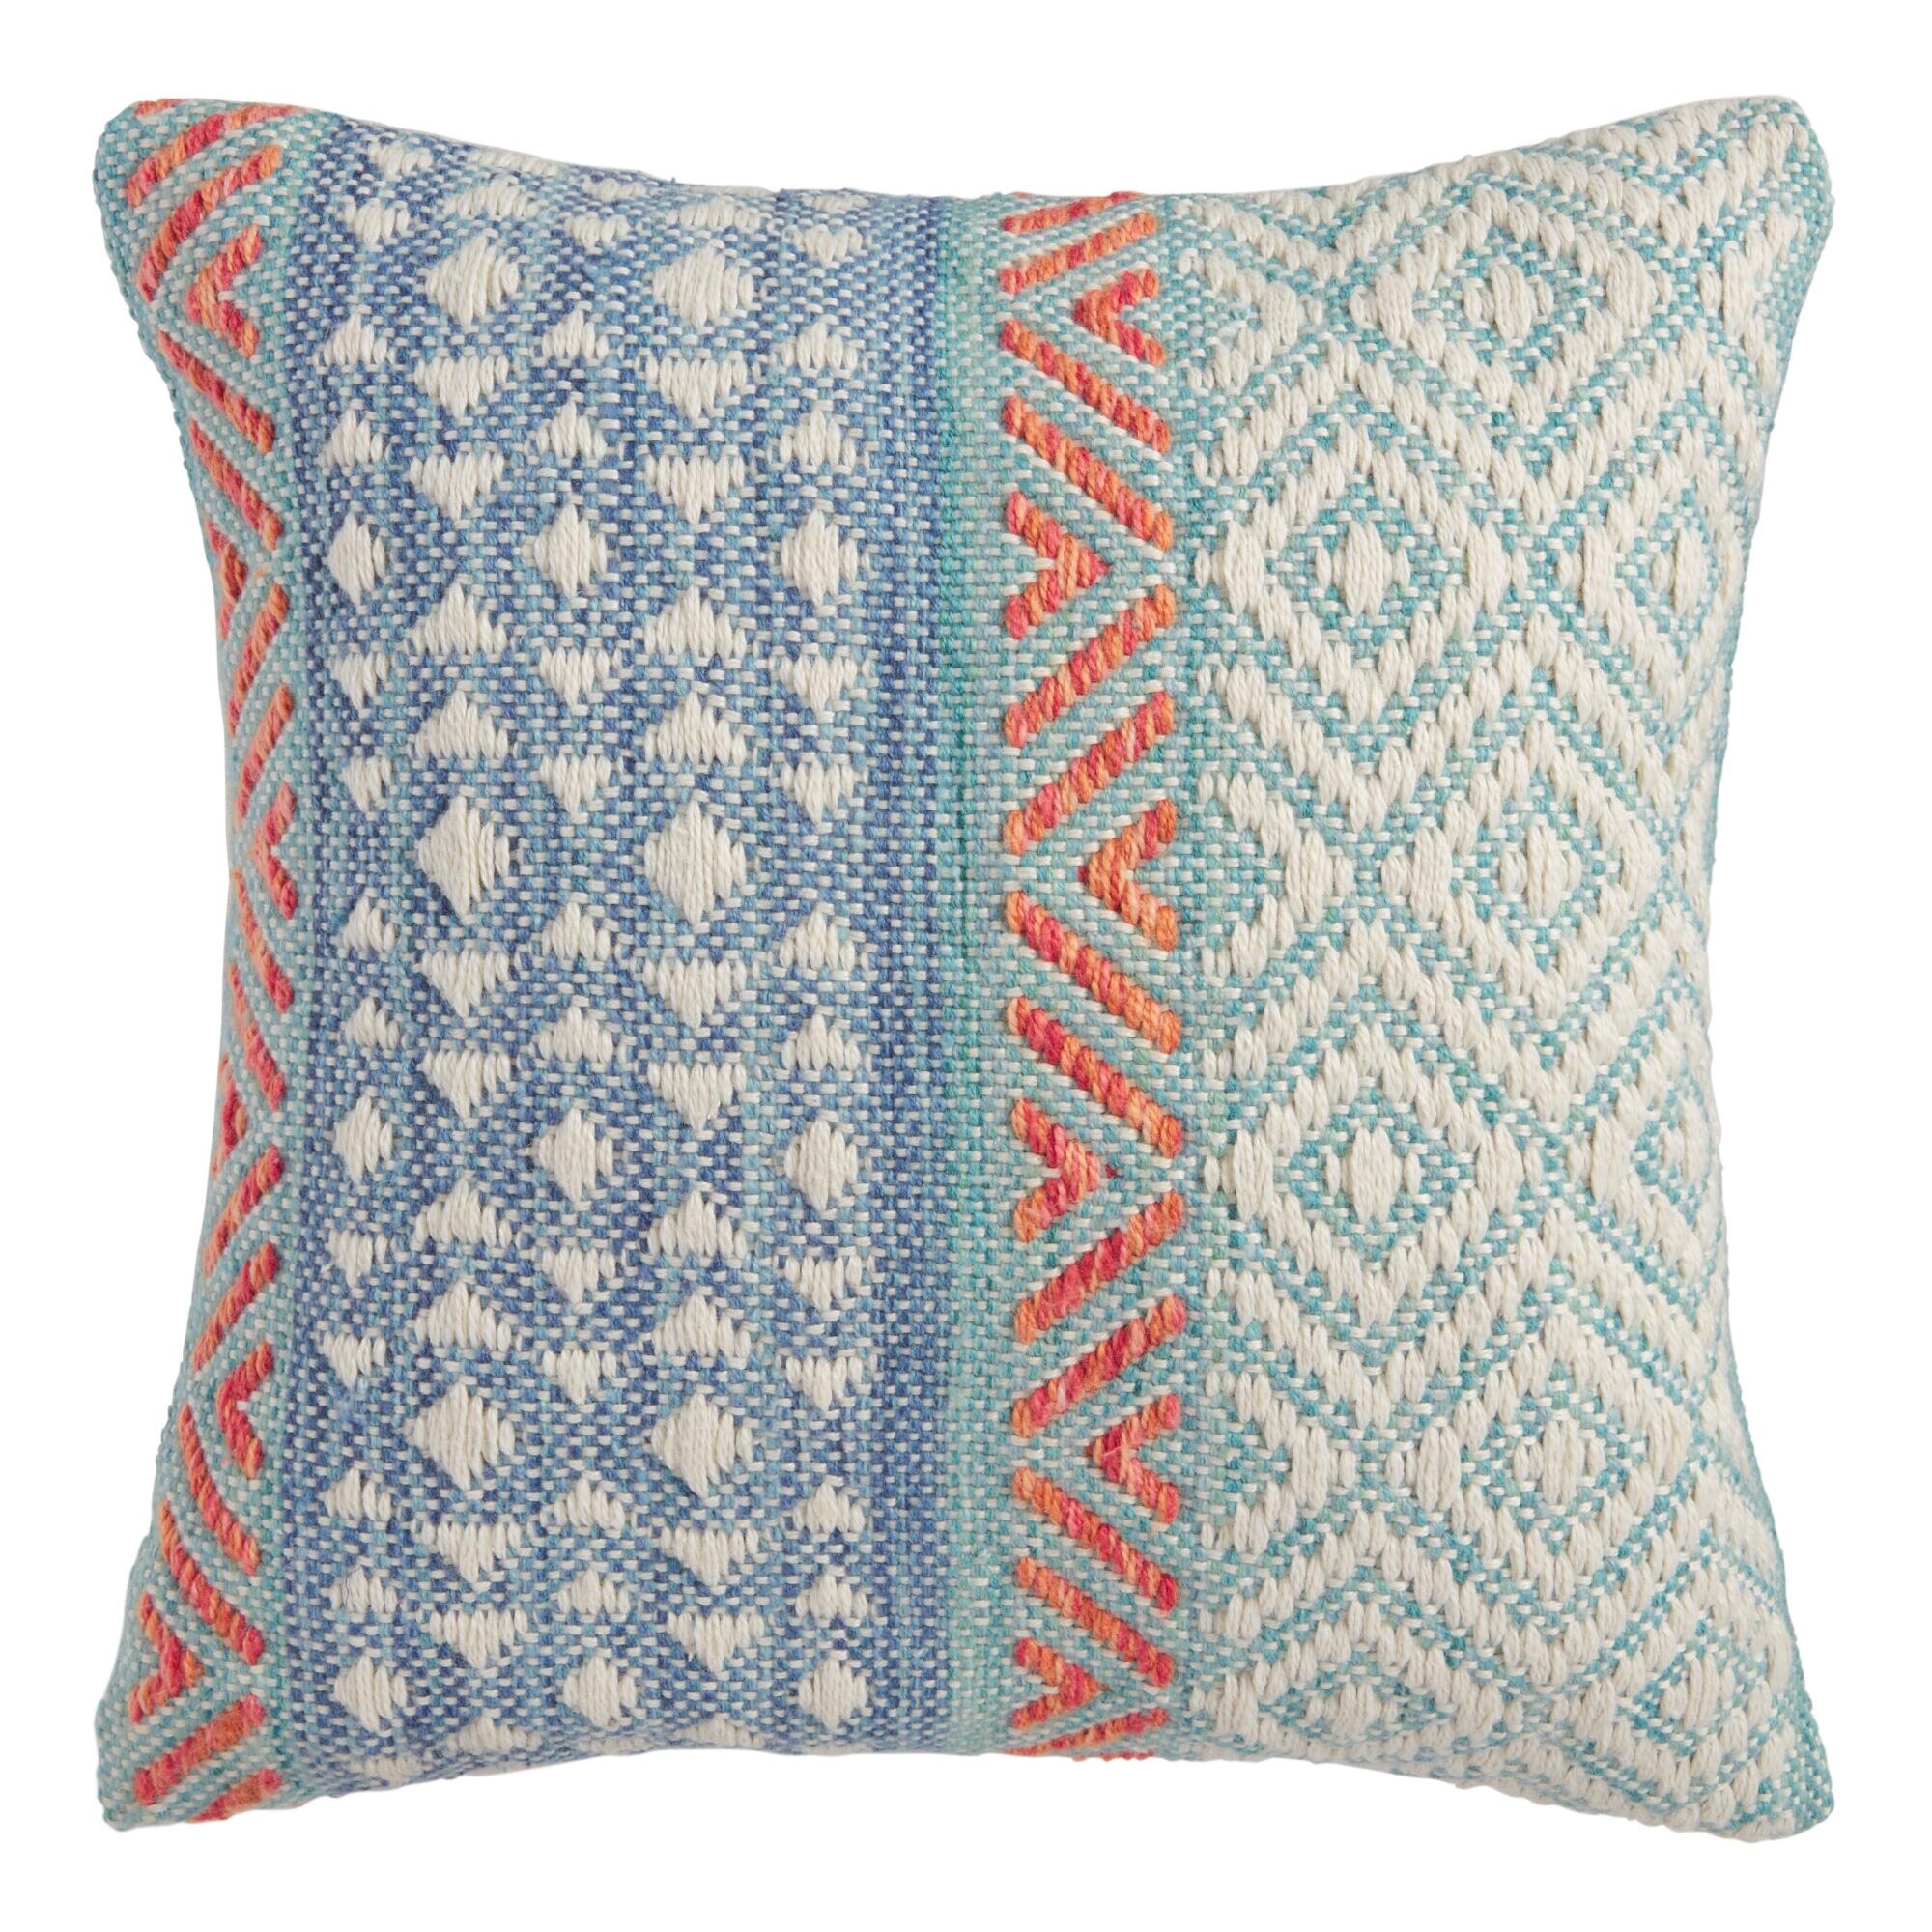 Dobby Woven Indoor Outdoor Throw Pillow - $24.49 from World Market